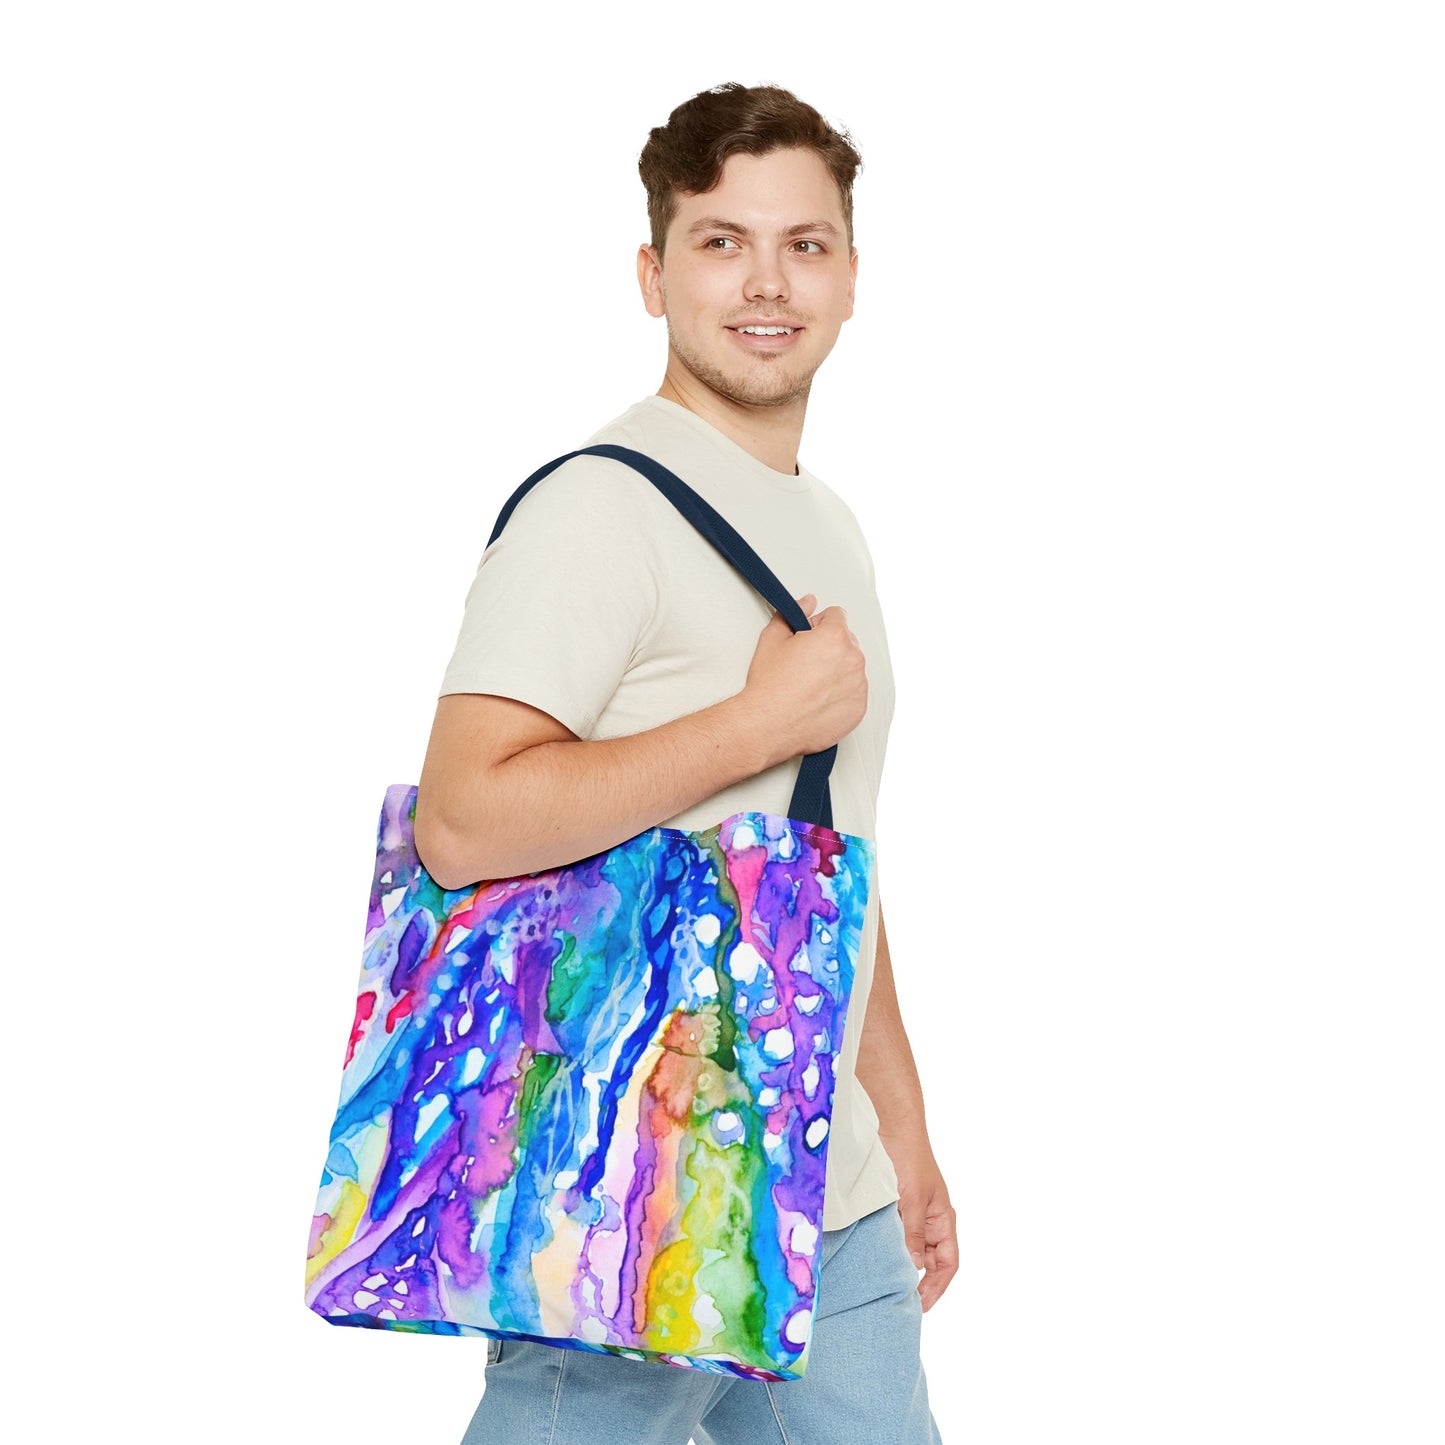 "Flow with the Universe” Tote with art by Avigail Sapir